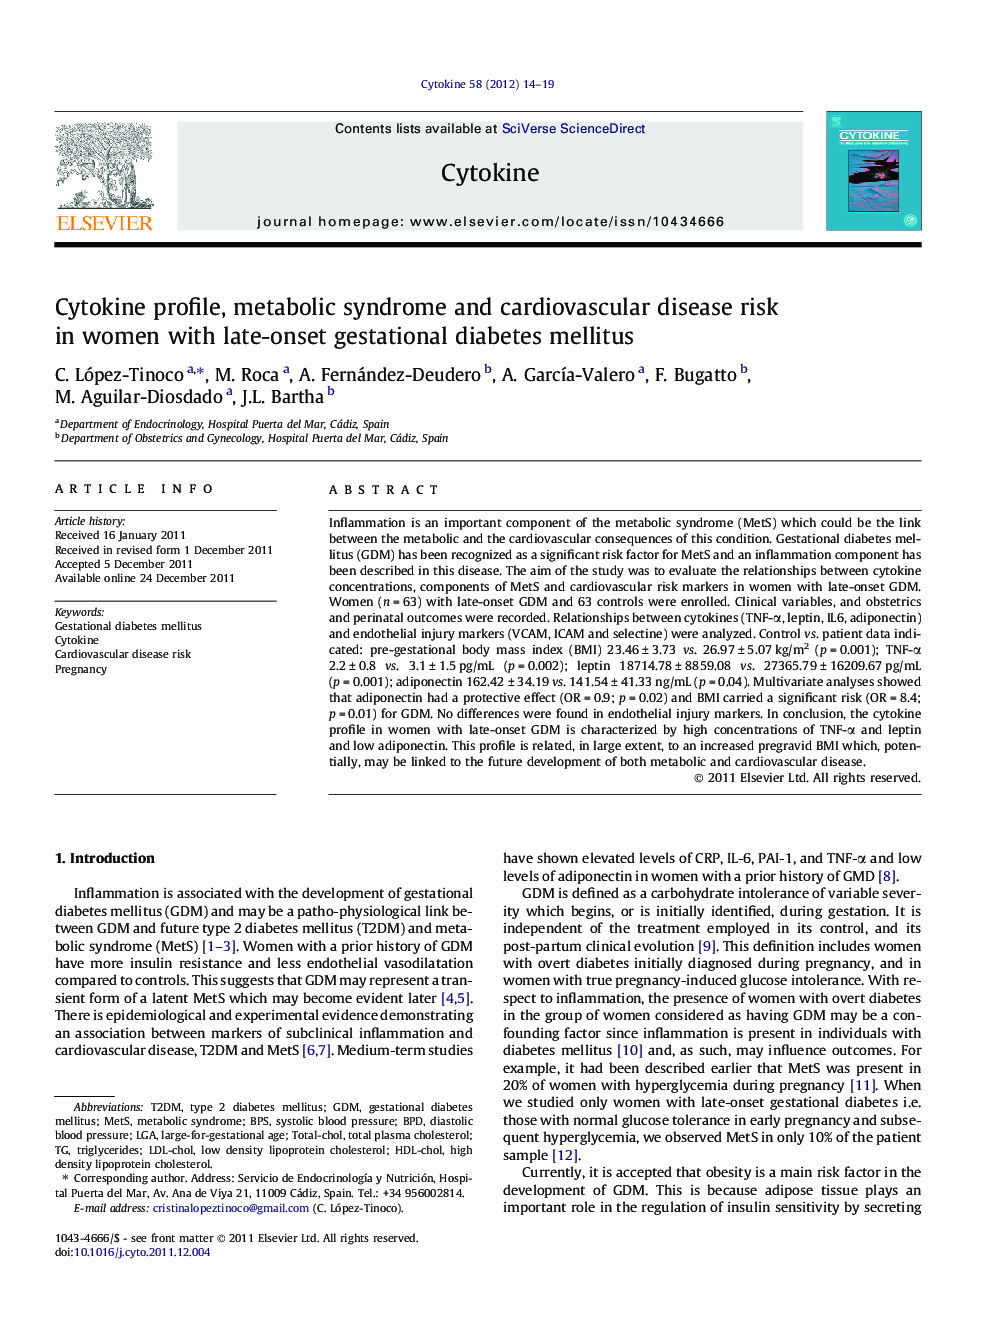 Cytokine profile, metabolic syndrome and cardiovascular disease risk in women with late-onset gestational diabetes mellitus